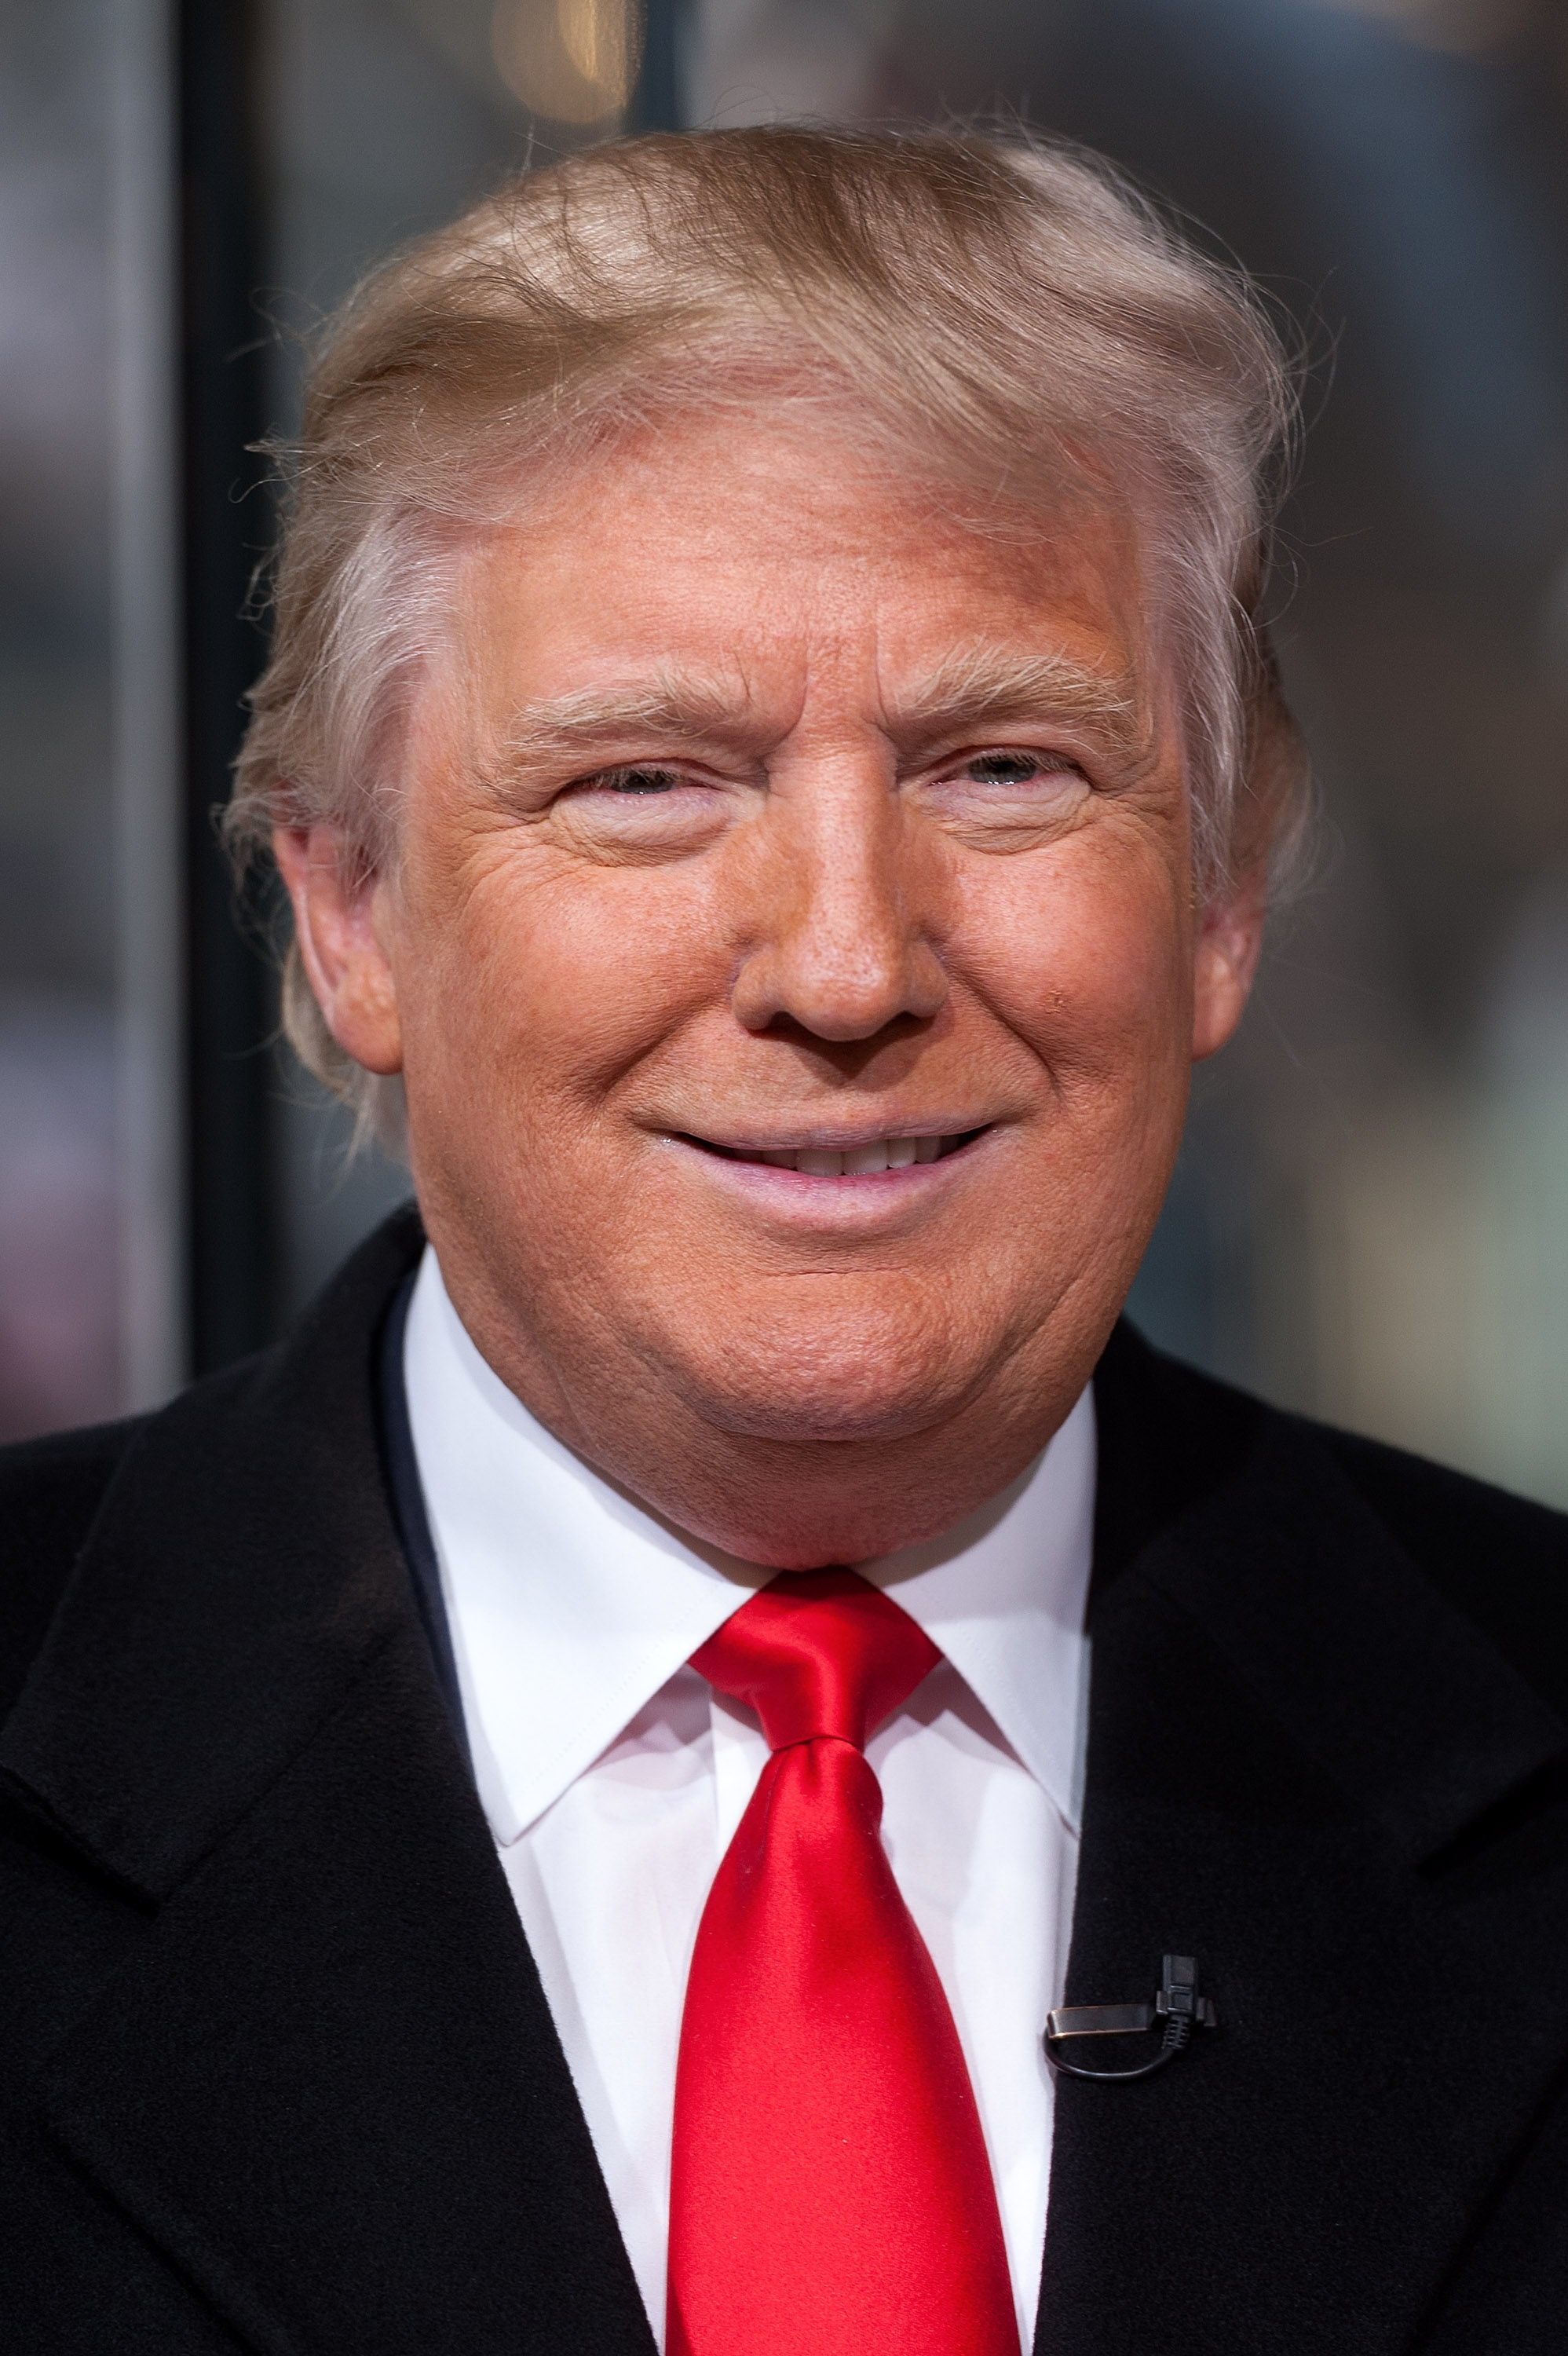 Donald Trump on the set of 'Extra' in New York City on Dec. 17, 2014.